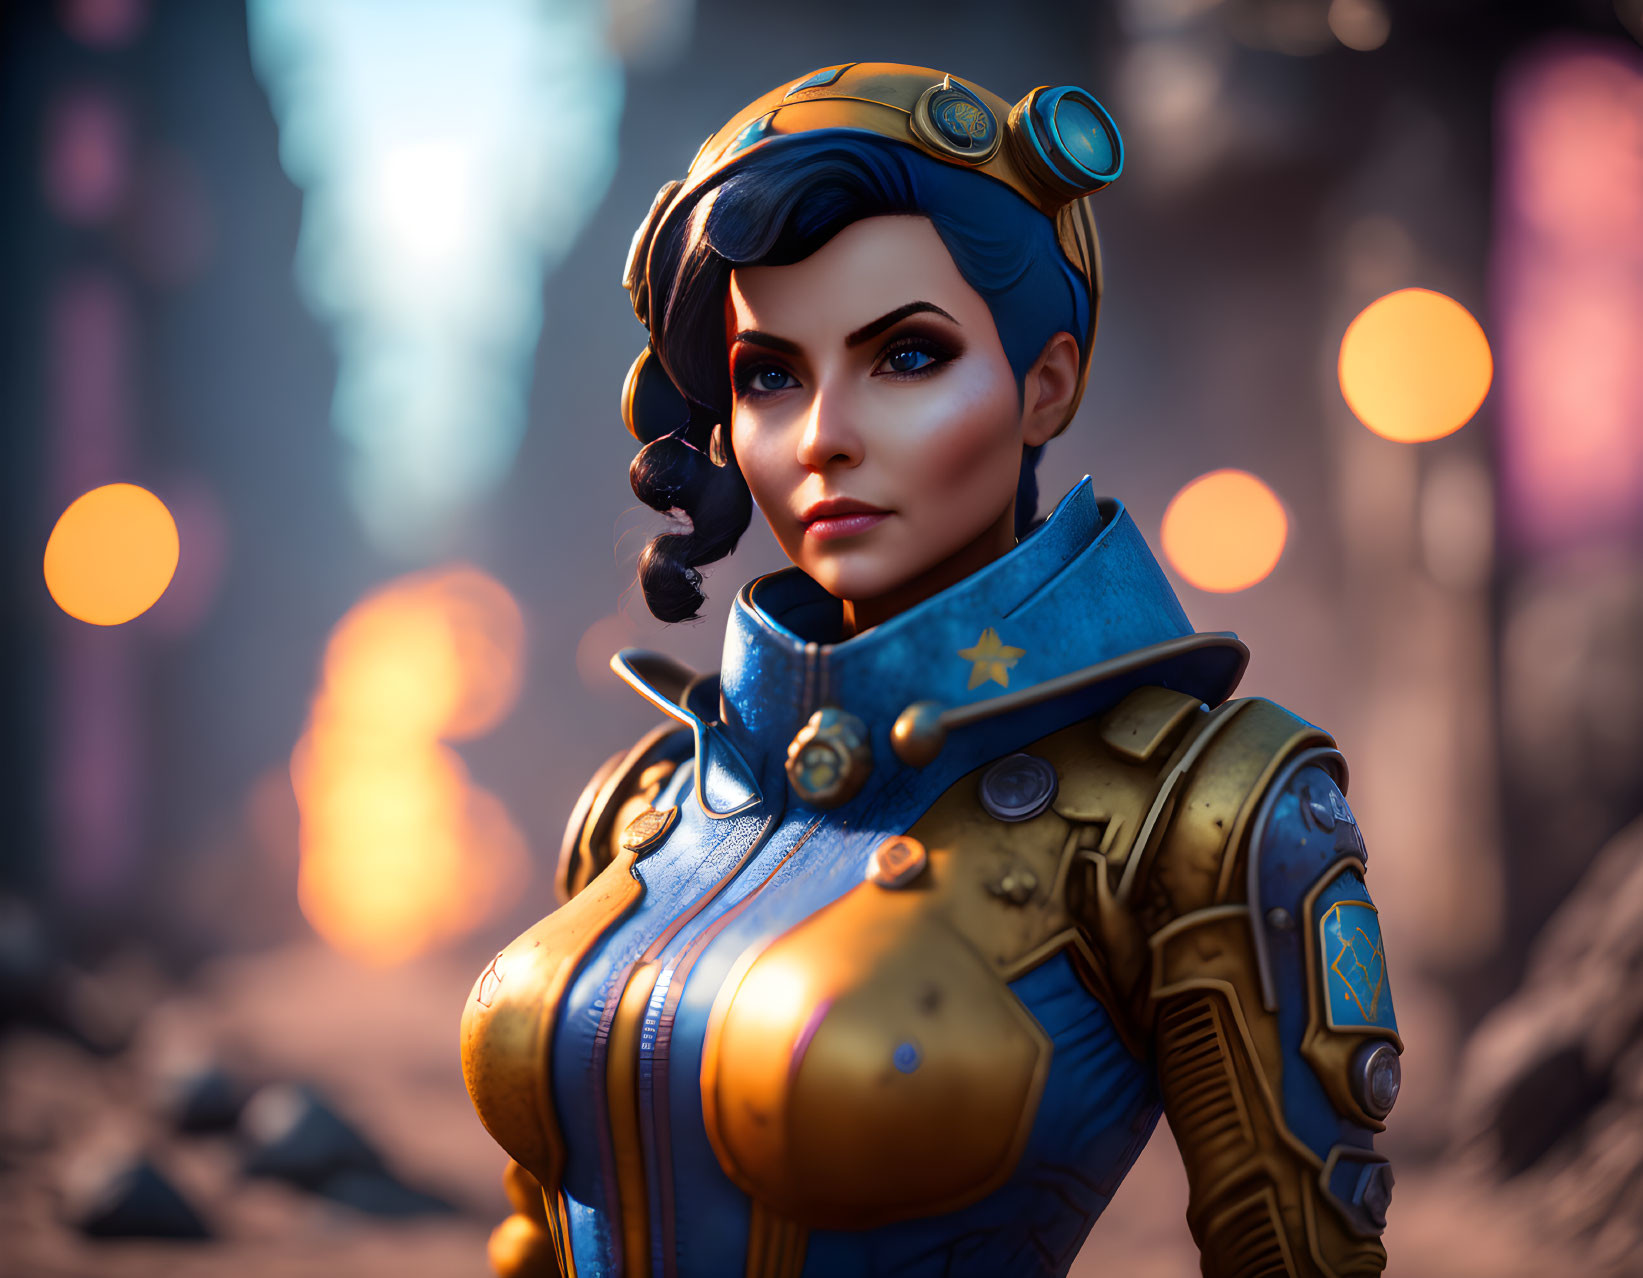 Digital artwork of female character in blue and gold armor with goggles, against warm glowing orbs on blurred background